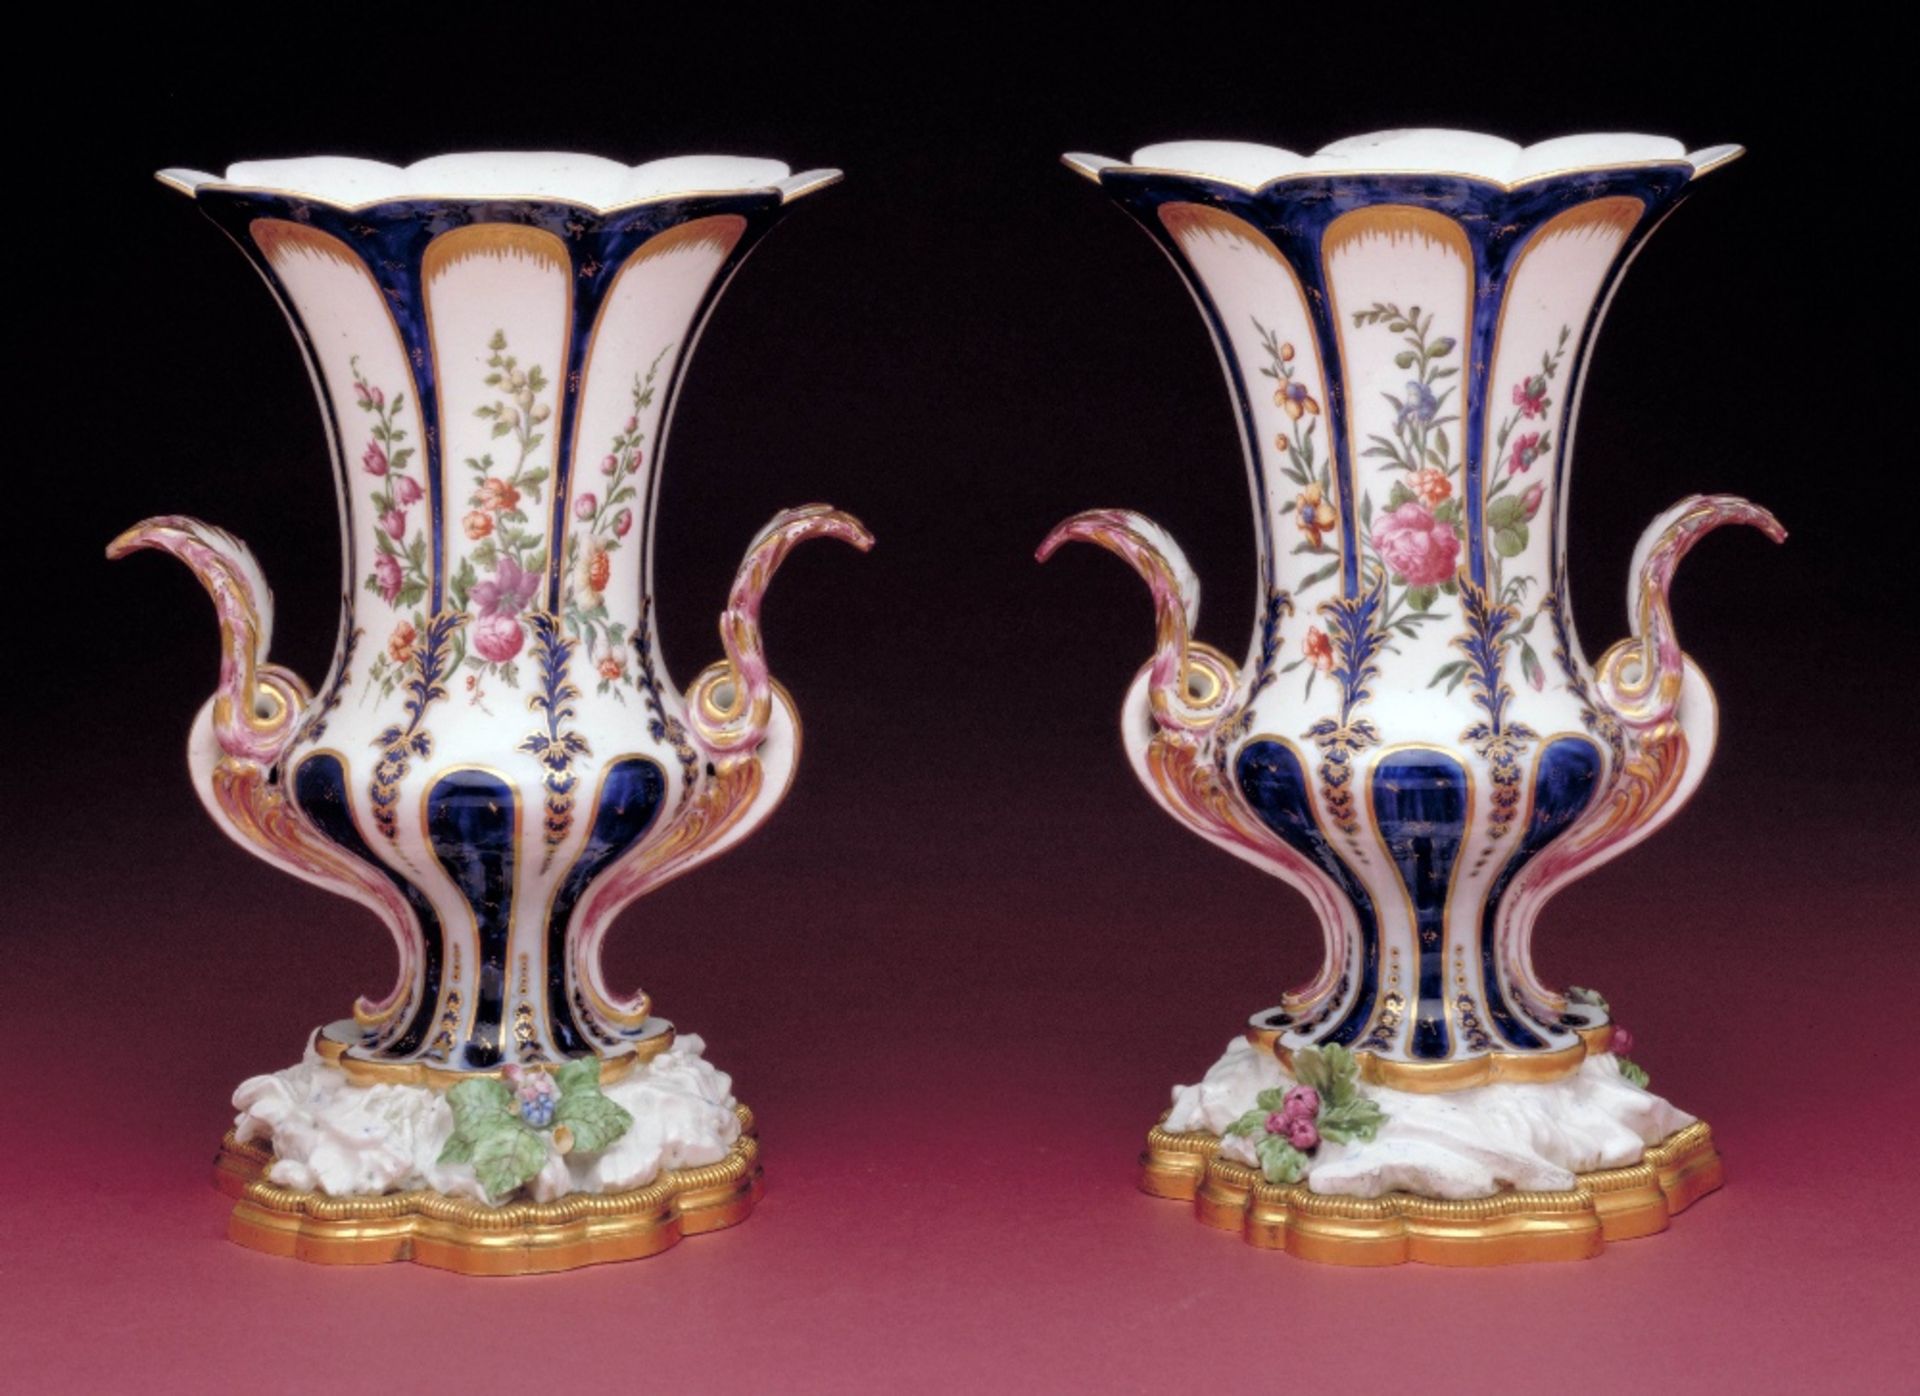 A pair of rare Meissen vases after the Duplessis model, circa 1755 - Image 3 of 3